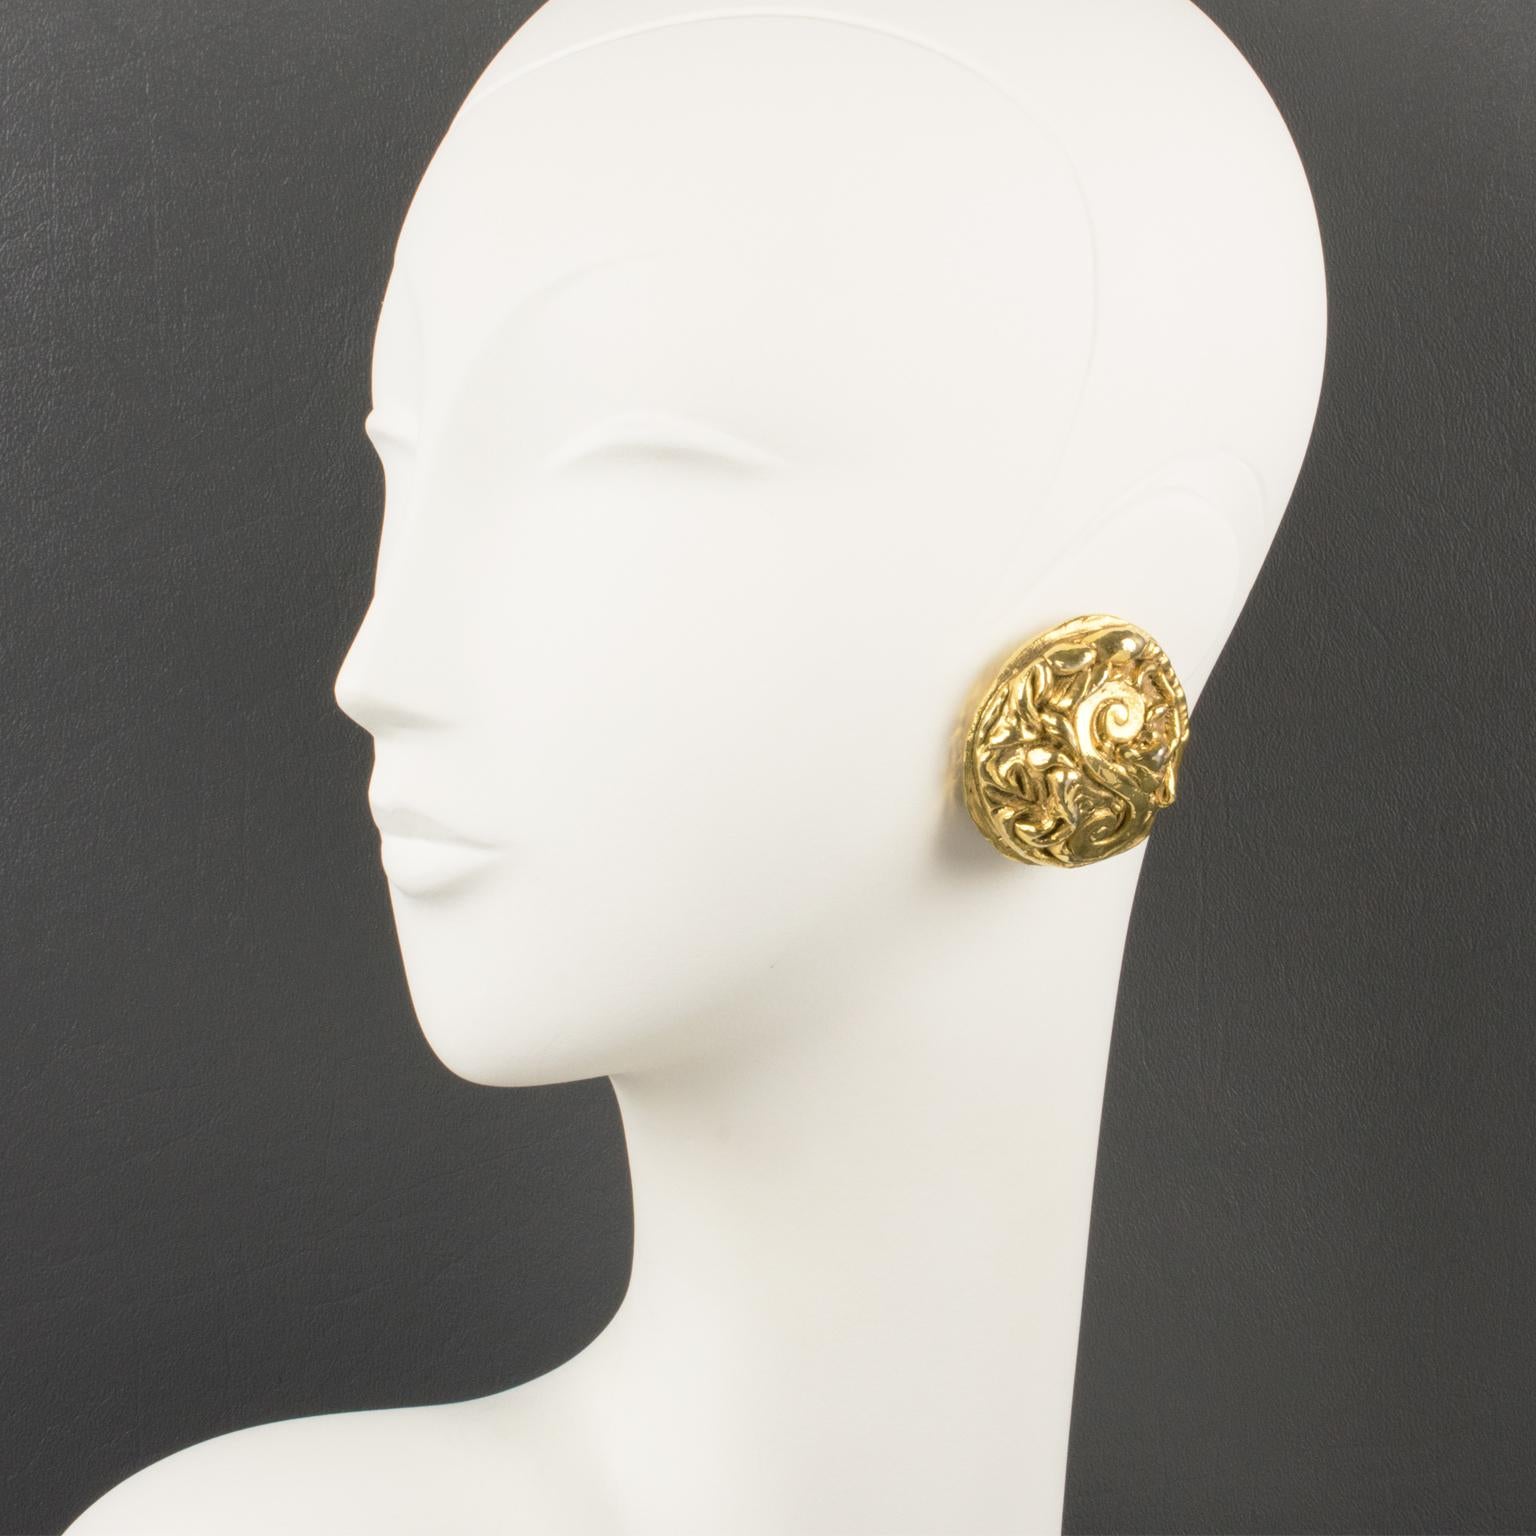 Stunning Kalinger Paris oversized clip-on earrings. Round-domed shape featuring a large gilt-metal coated resin cameo with intricately carved design. Marked on the clip: 